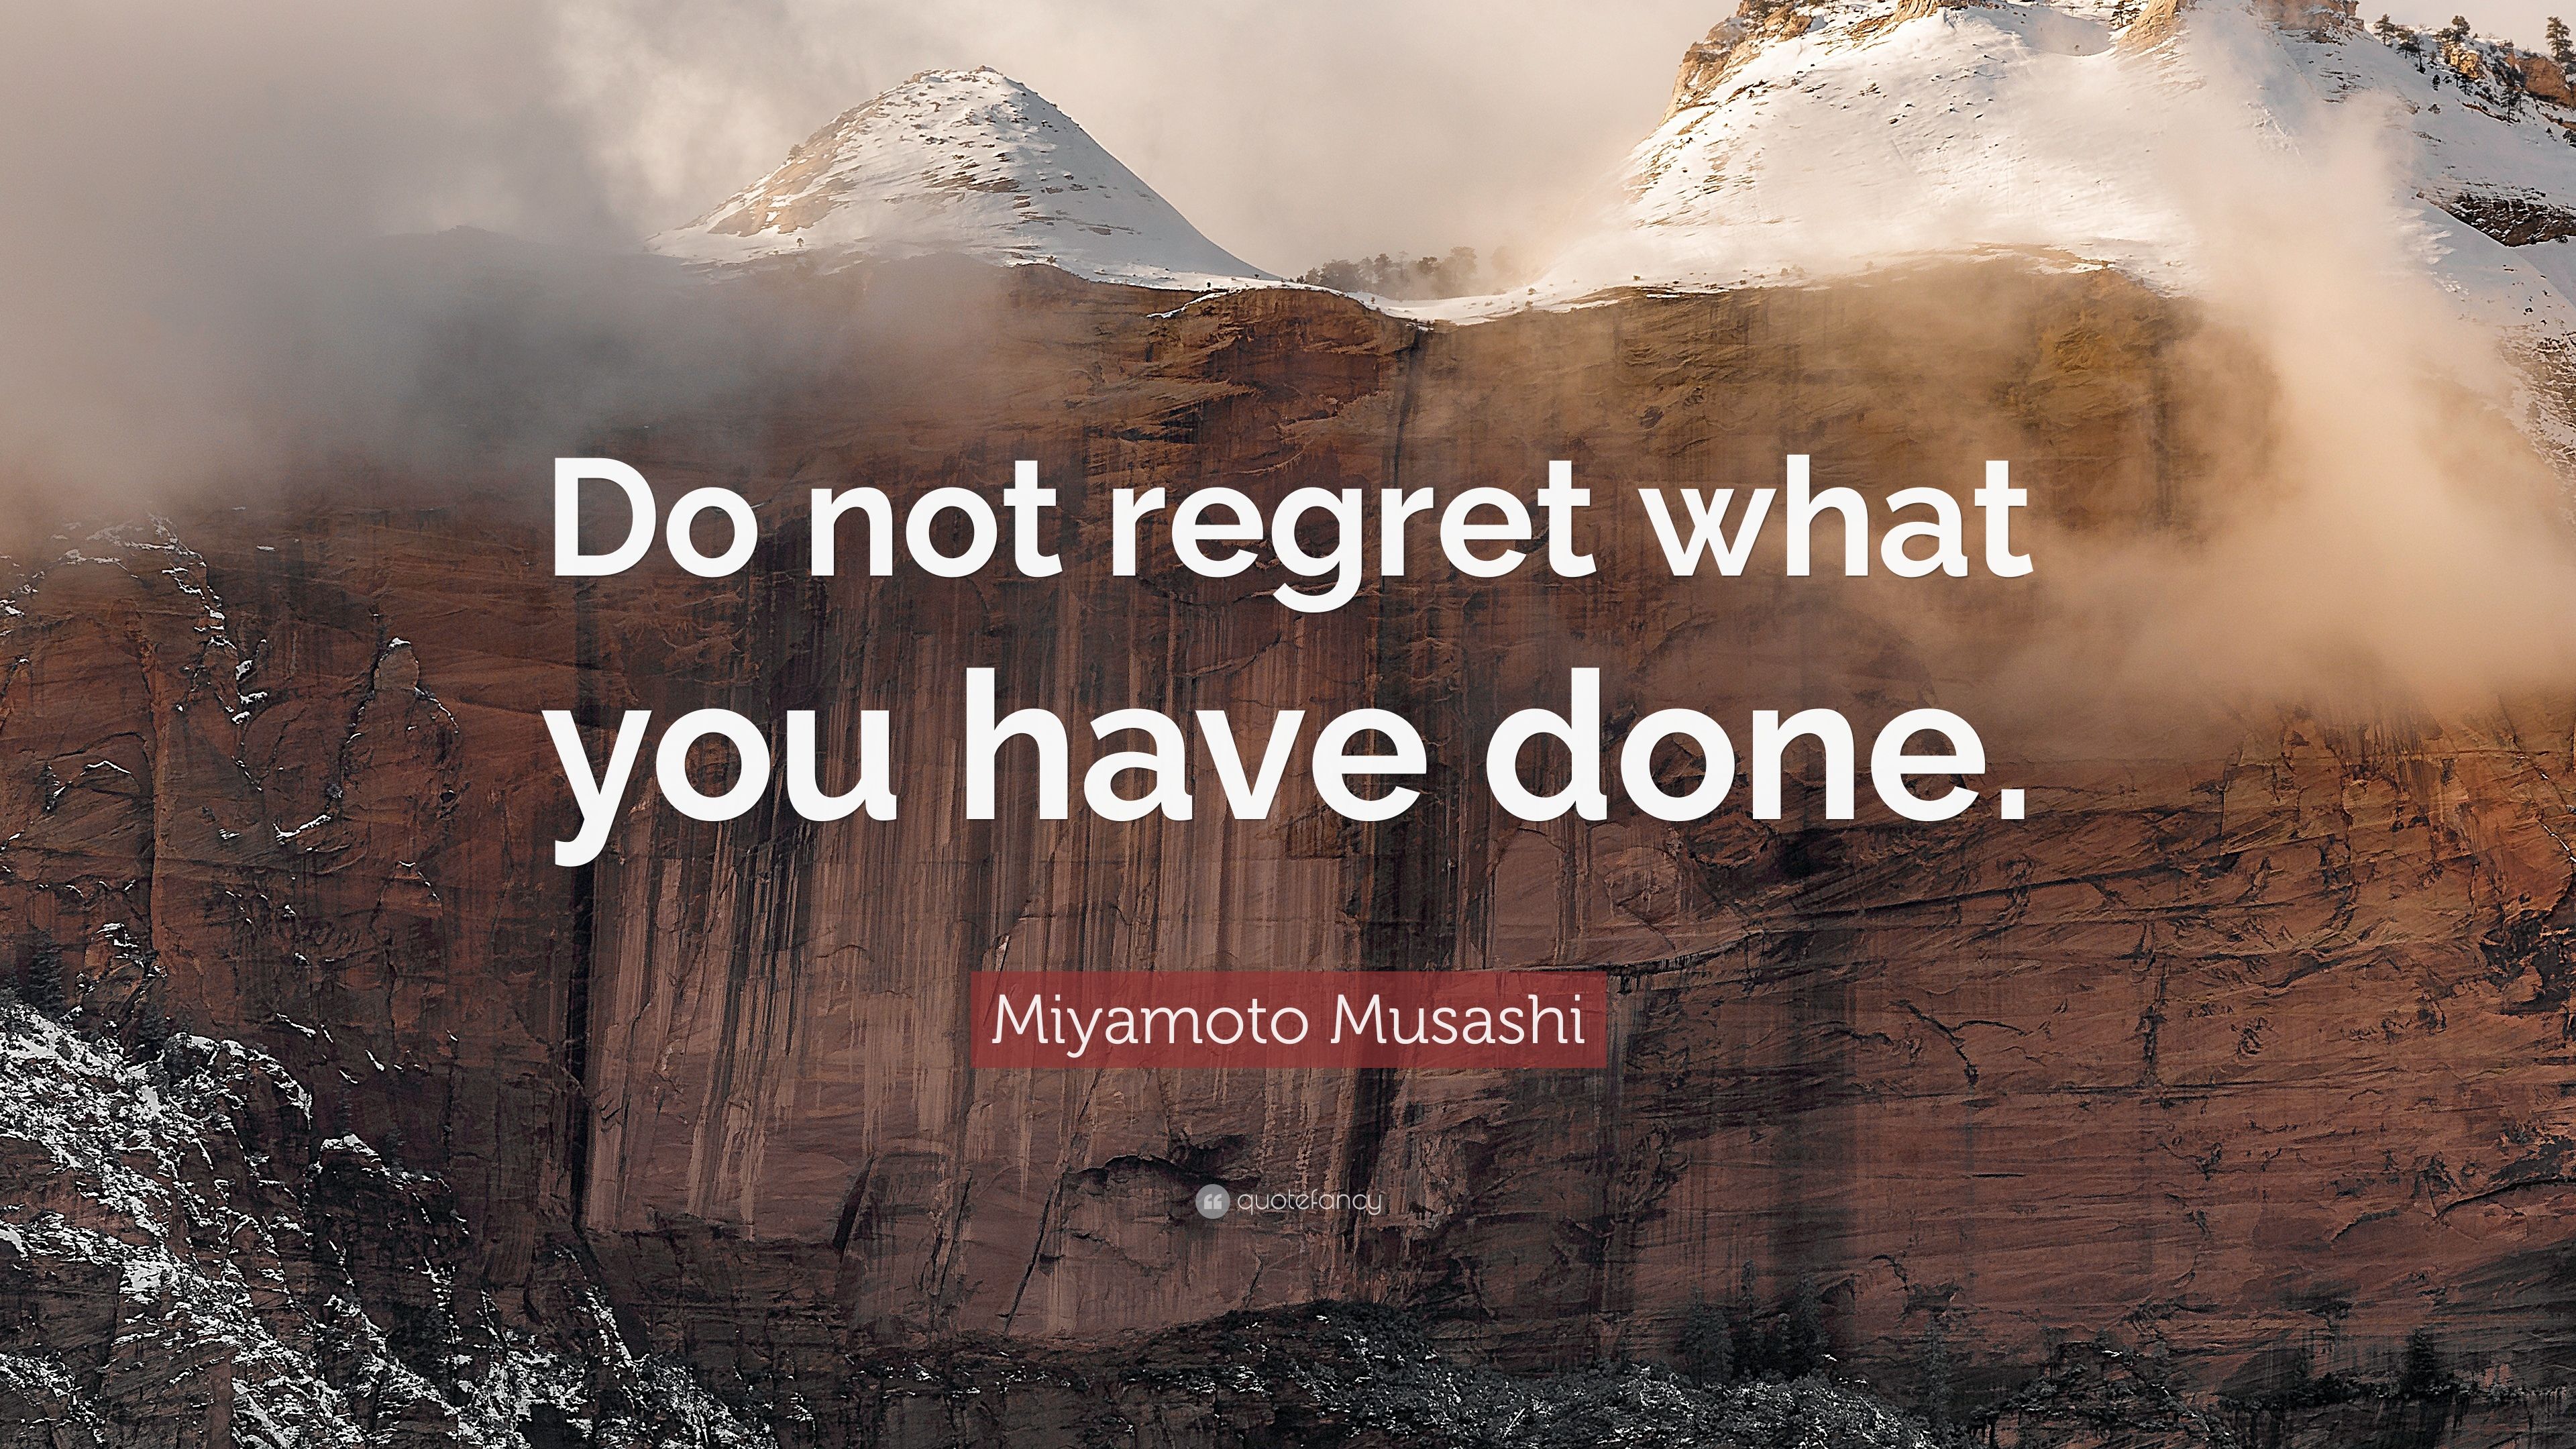 Miyamoto Musashi Quote: “Do not regret what you have done.” 12